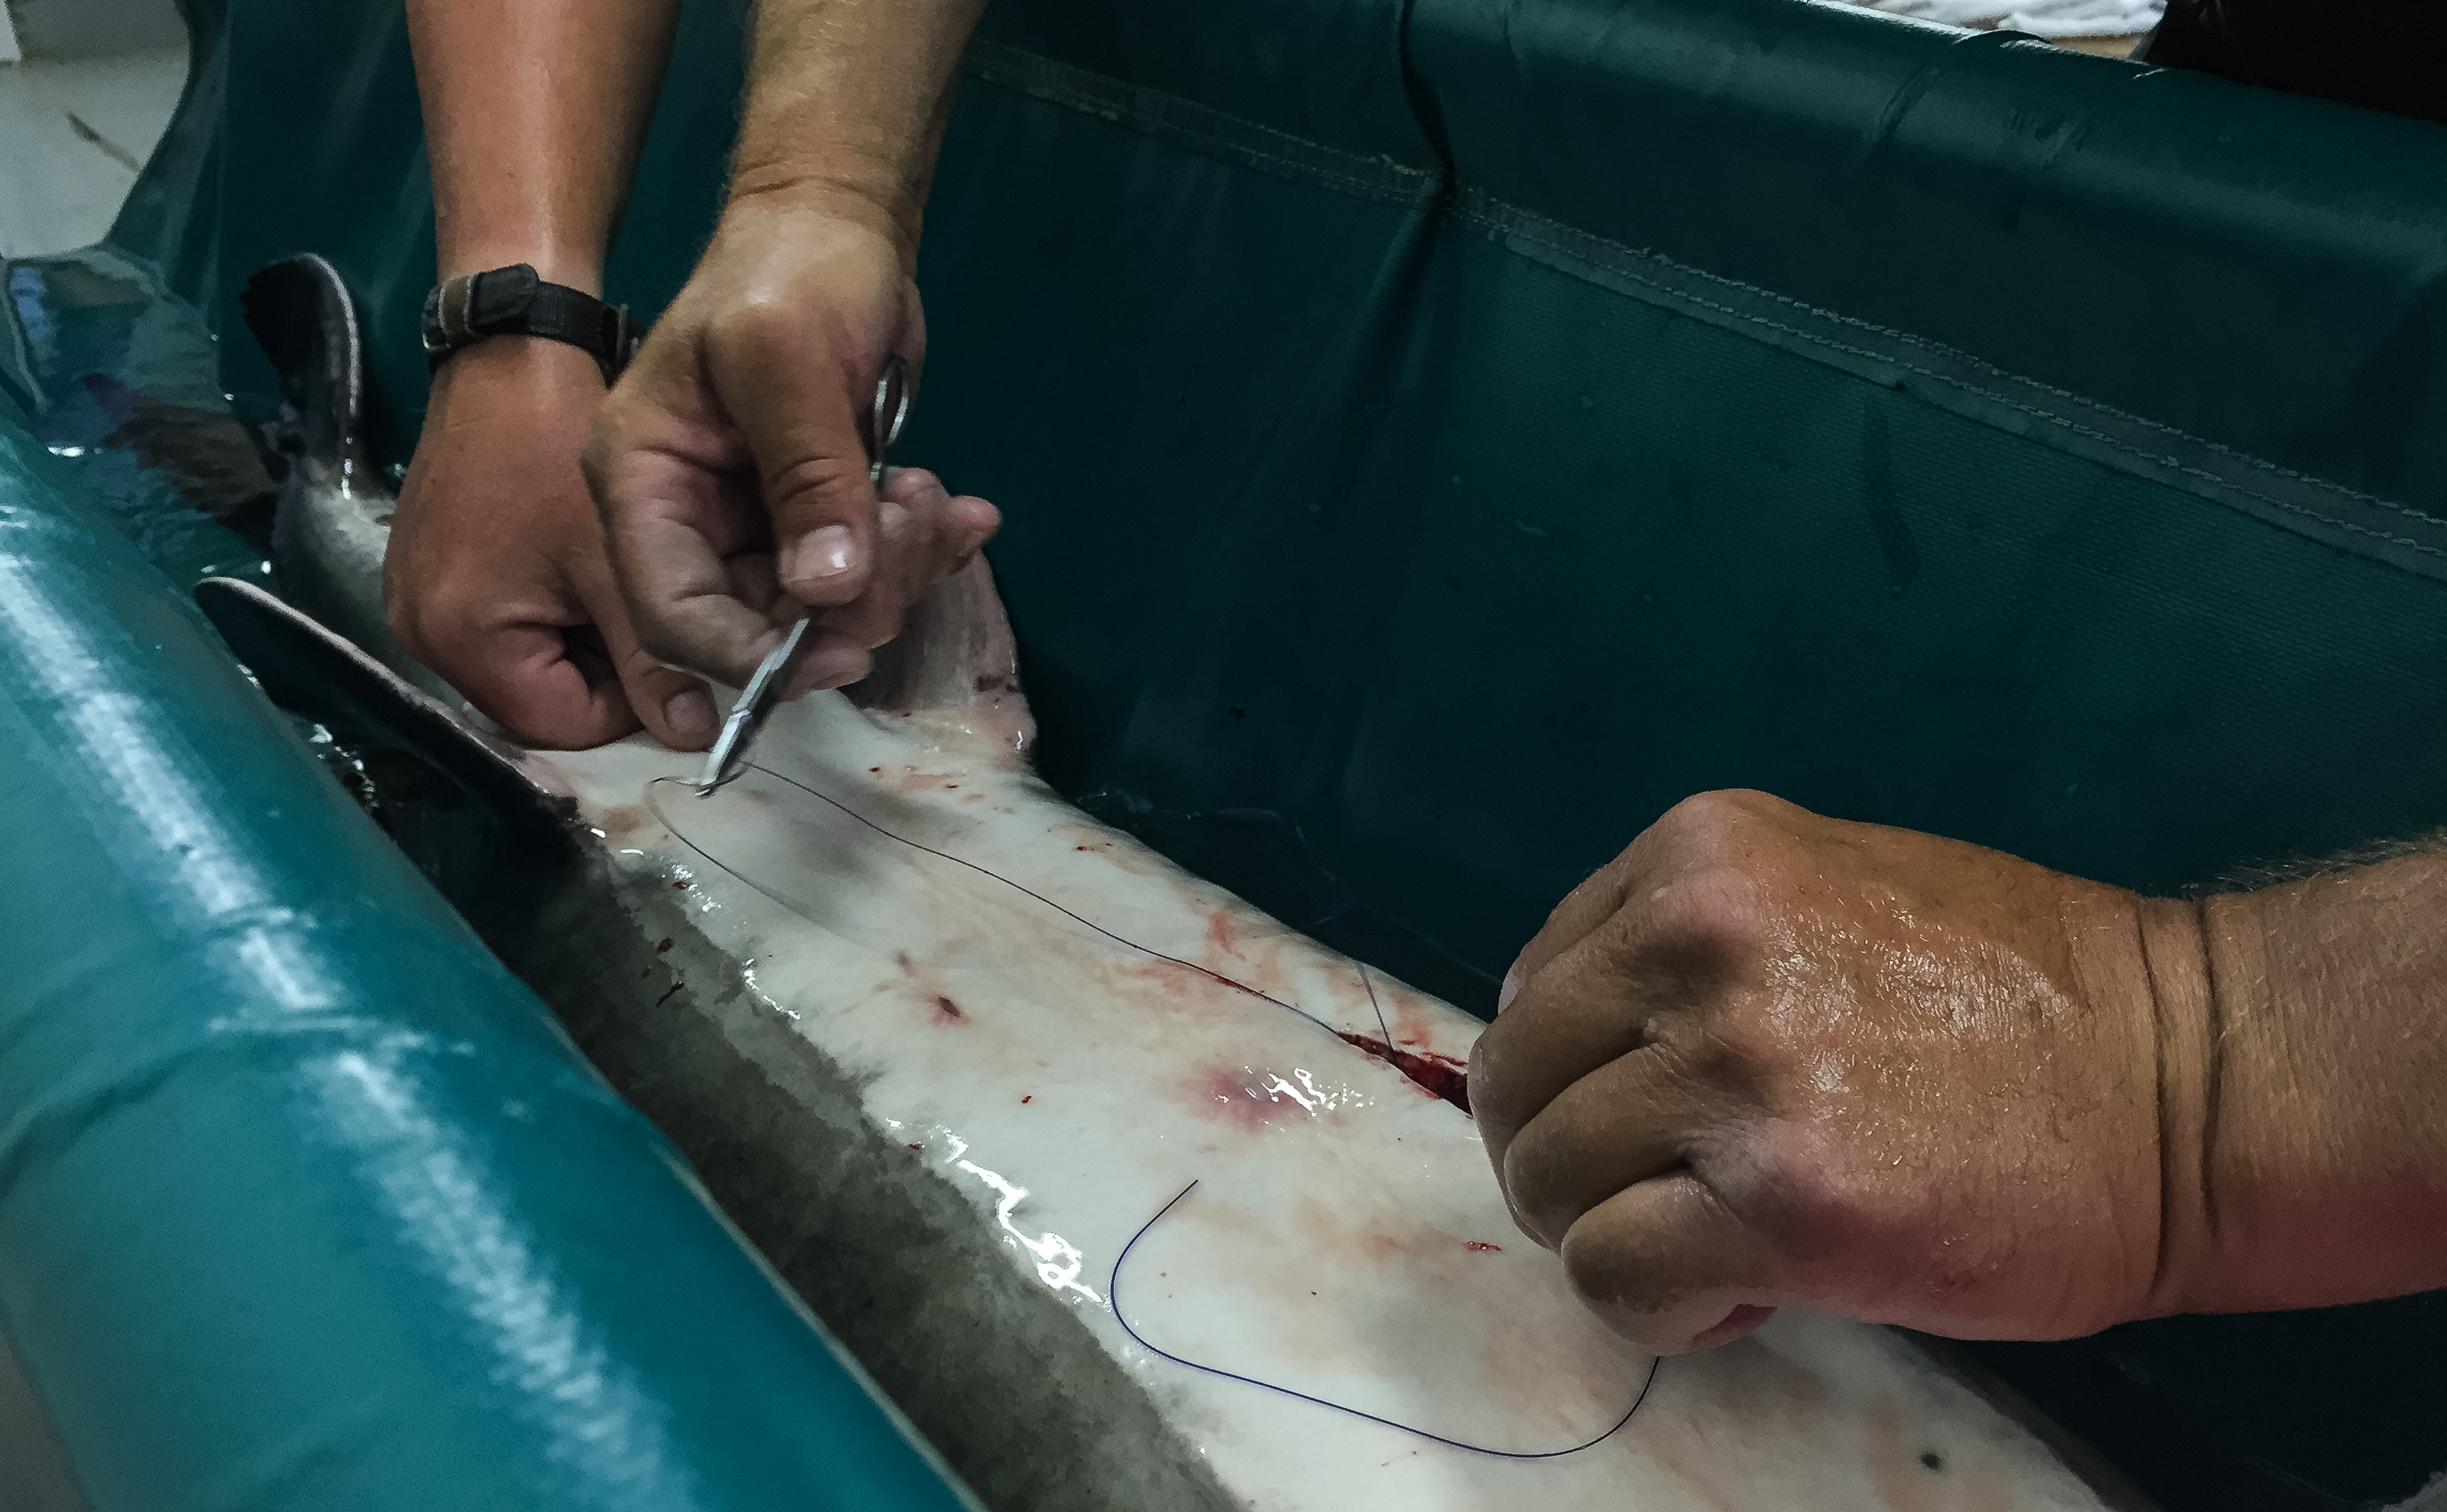 An adult sturgeon in sutured up after captive spawning